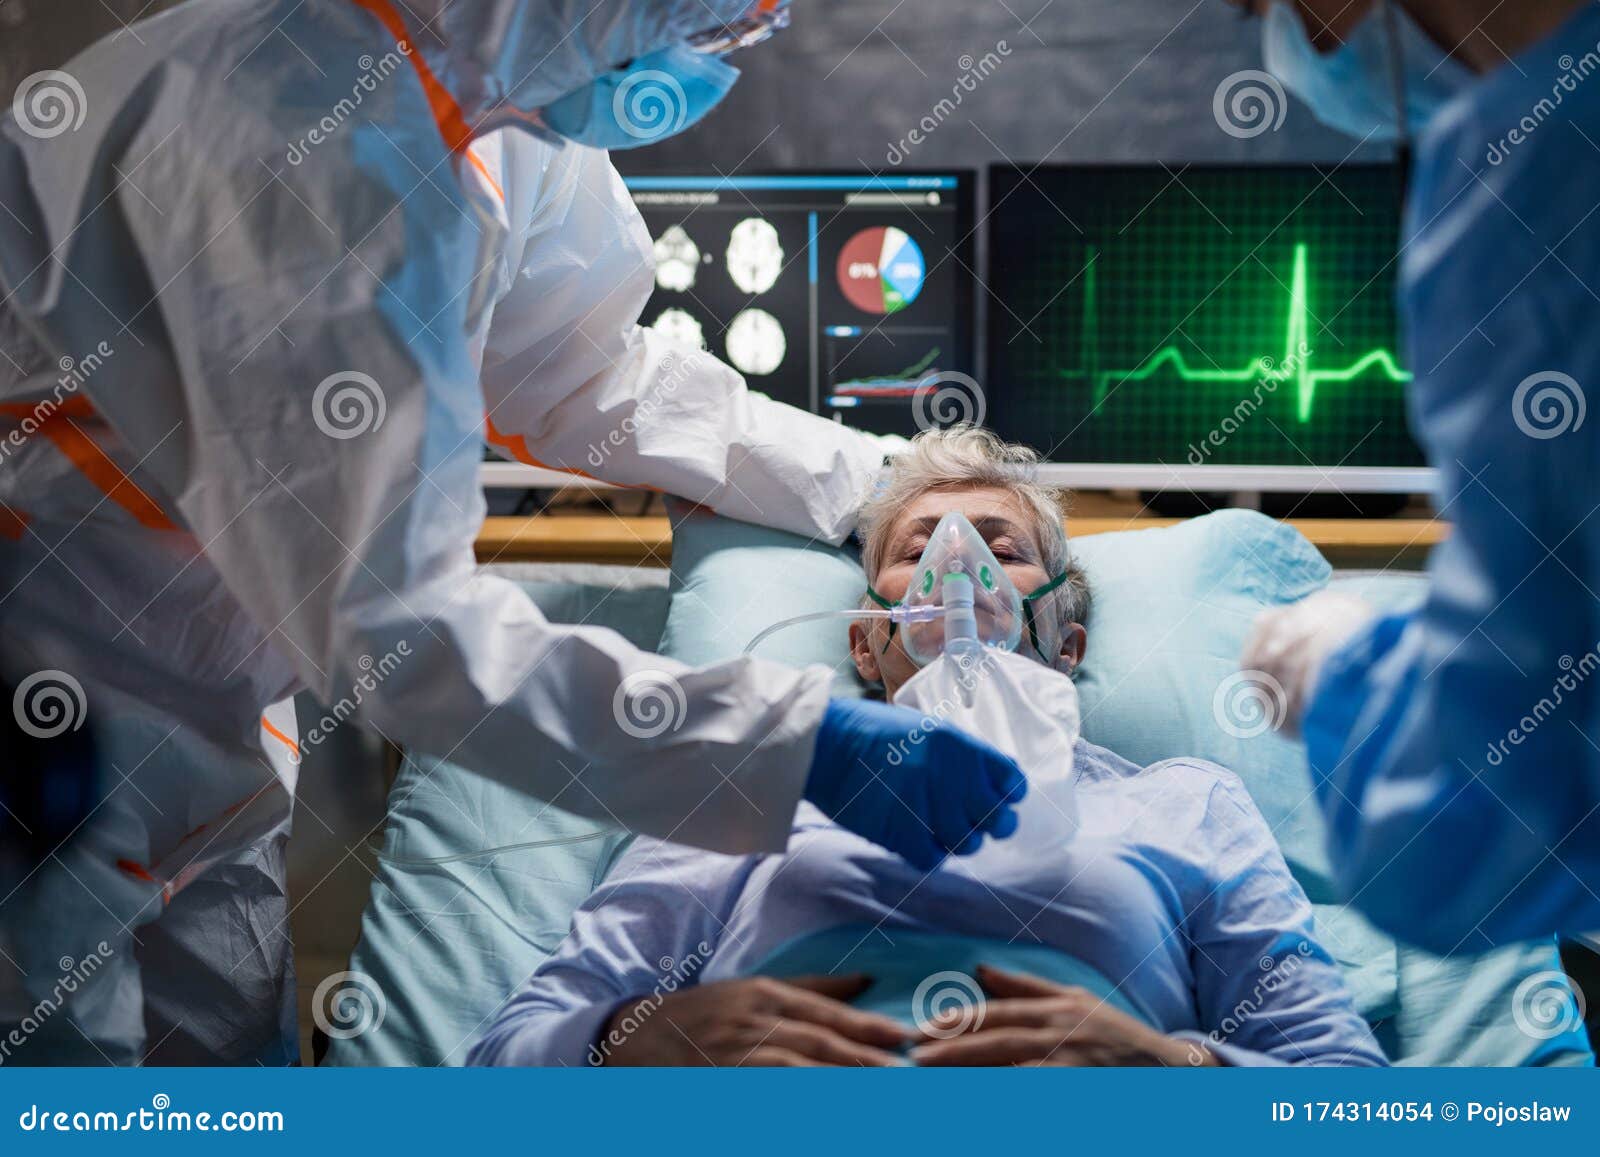 infected patient in quarantine lying in bed in hospital, coronavirus concept.